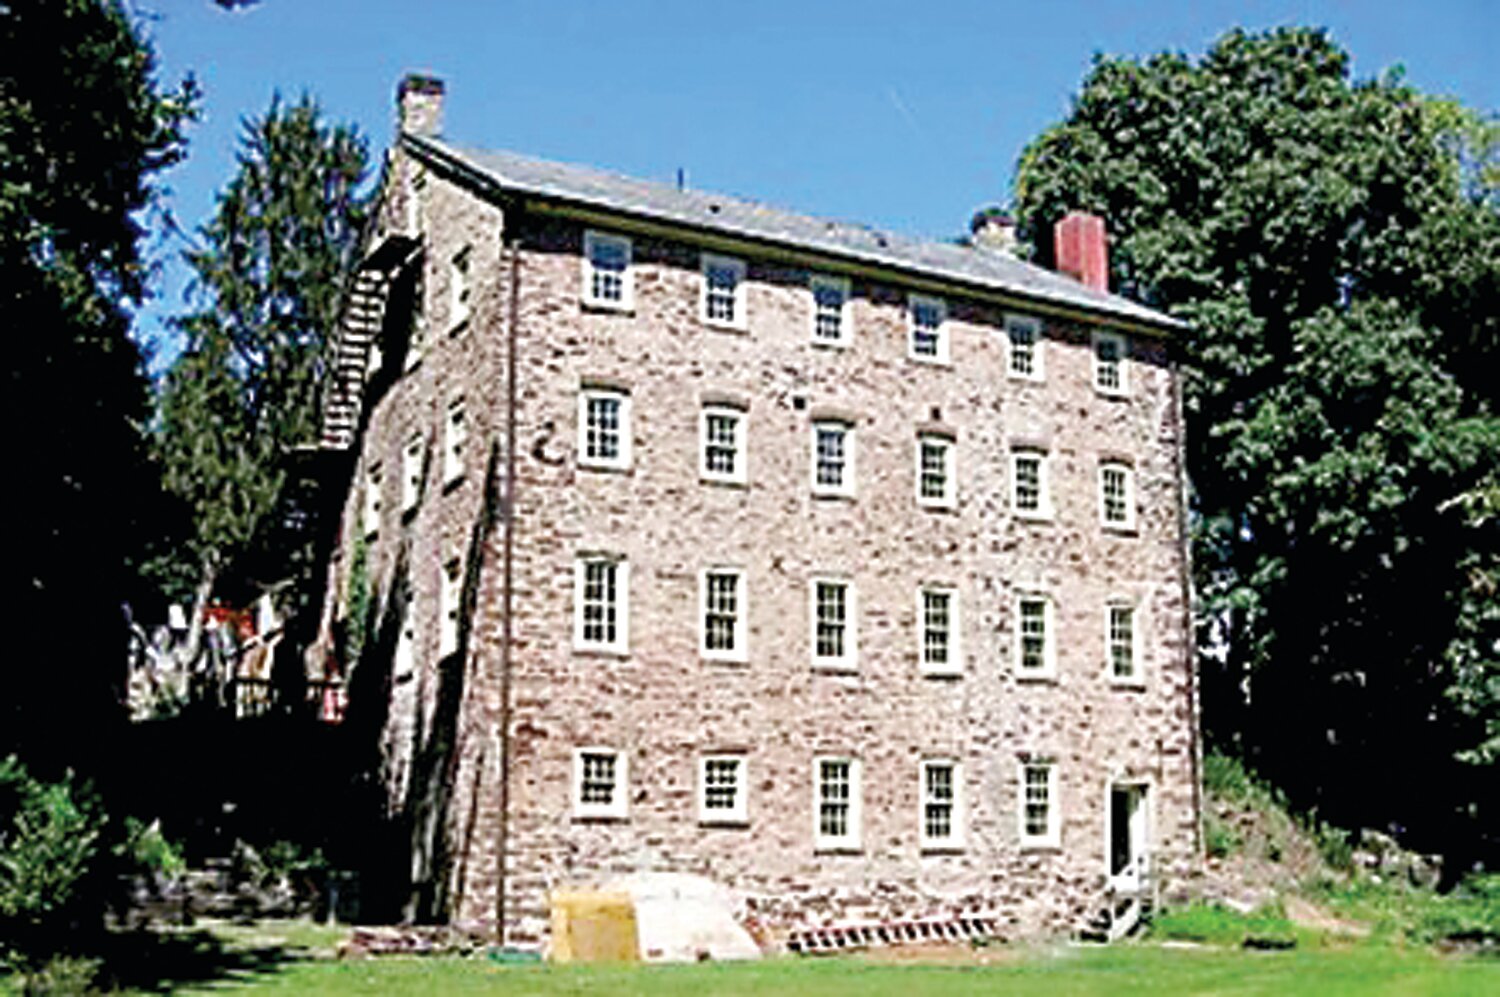 William Maris’ woolen mill, constructed around 1816, still stands today, housing condominiums on Old Mill Road in New Hope.